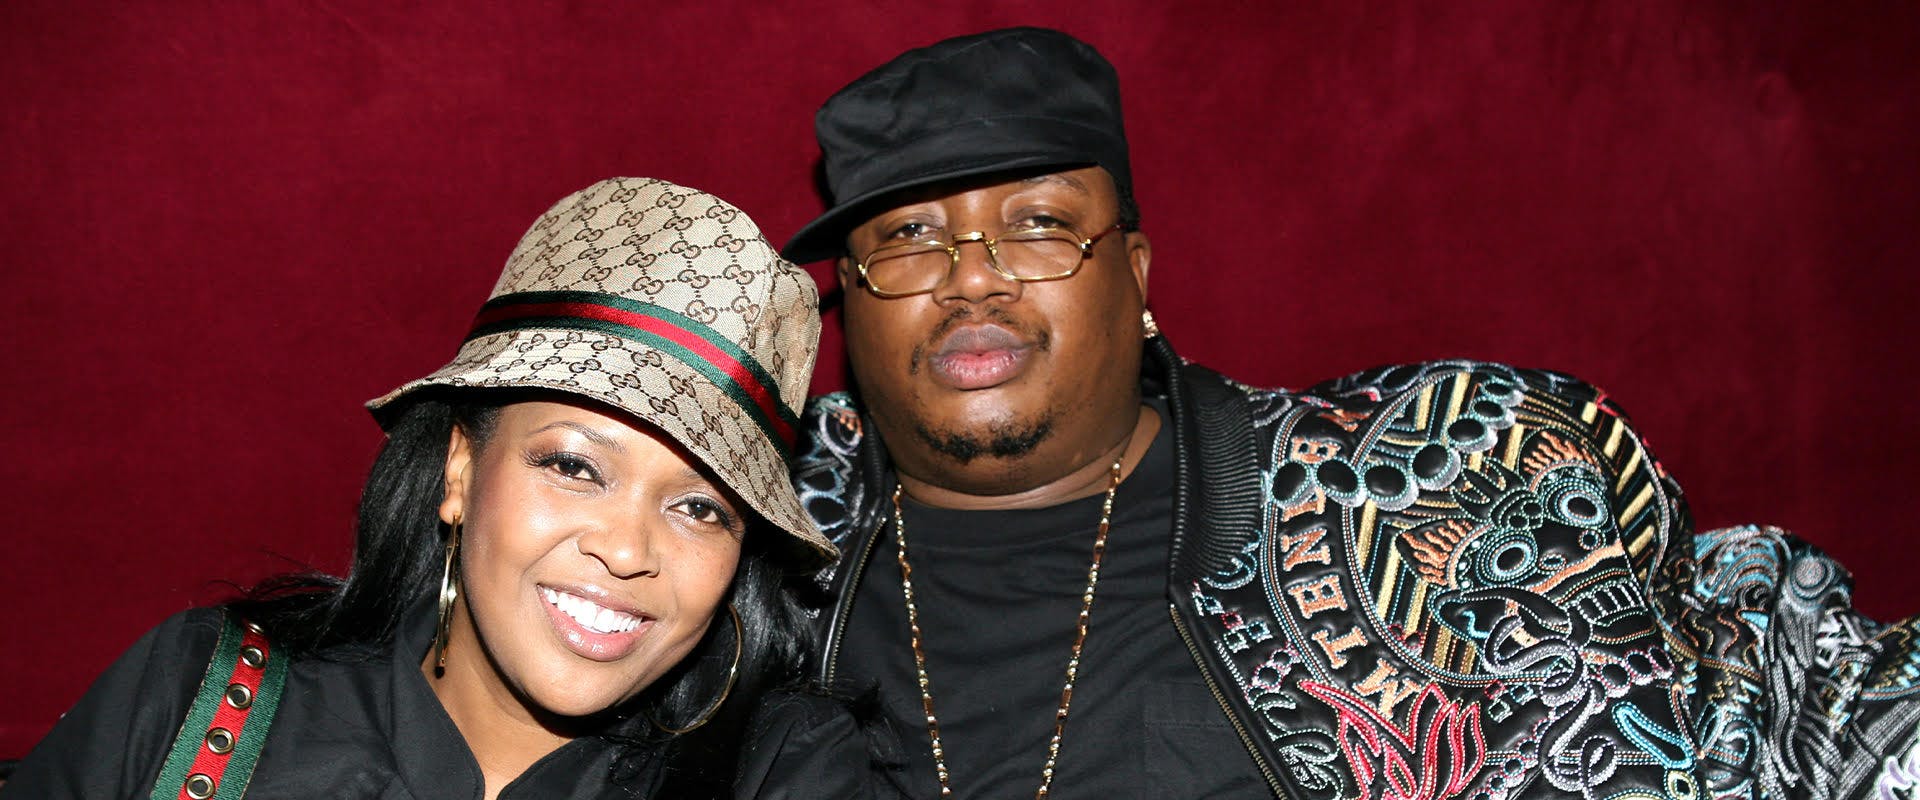 E-40 and wife Tracey during E-40 Record Release Party at Basque in Los Angeles - March 15, 2006 at Basque in Los Angeles, California, United States